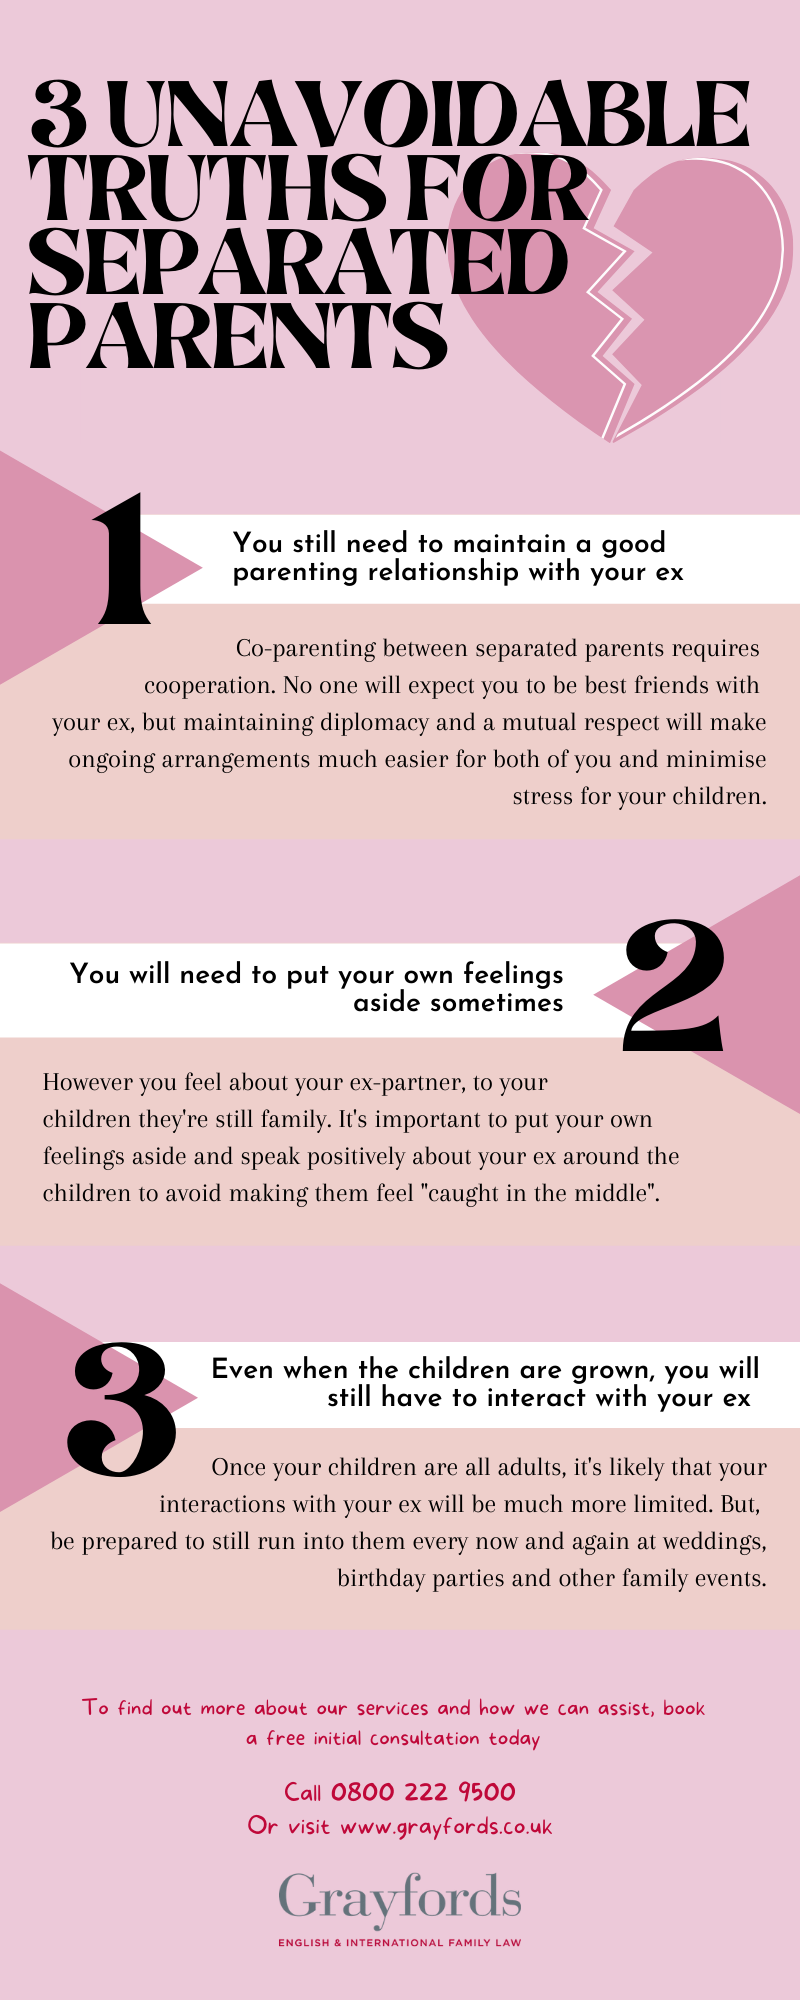 Three Unavoidable Truths For Separated Parents